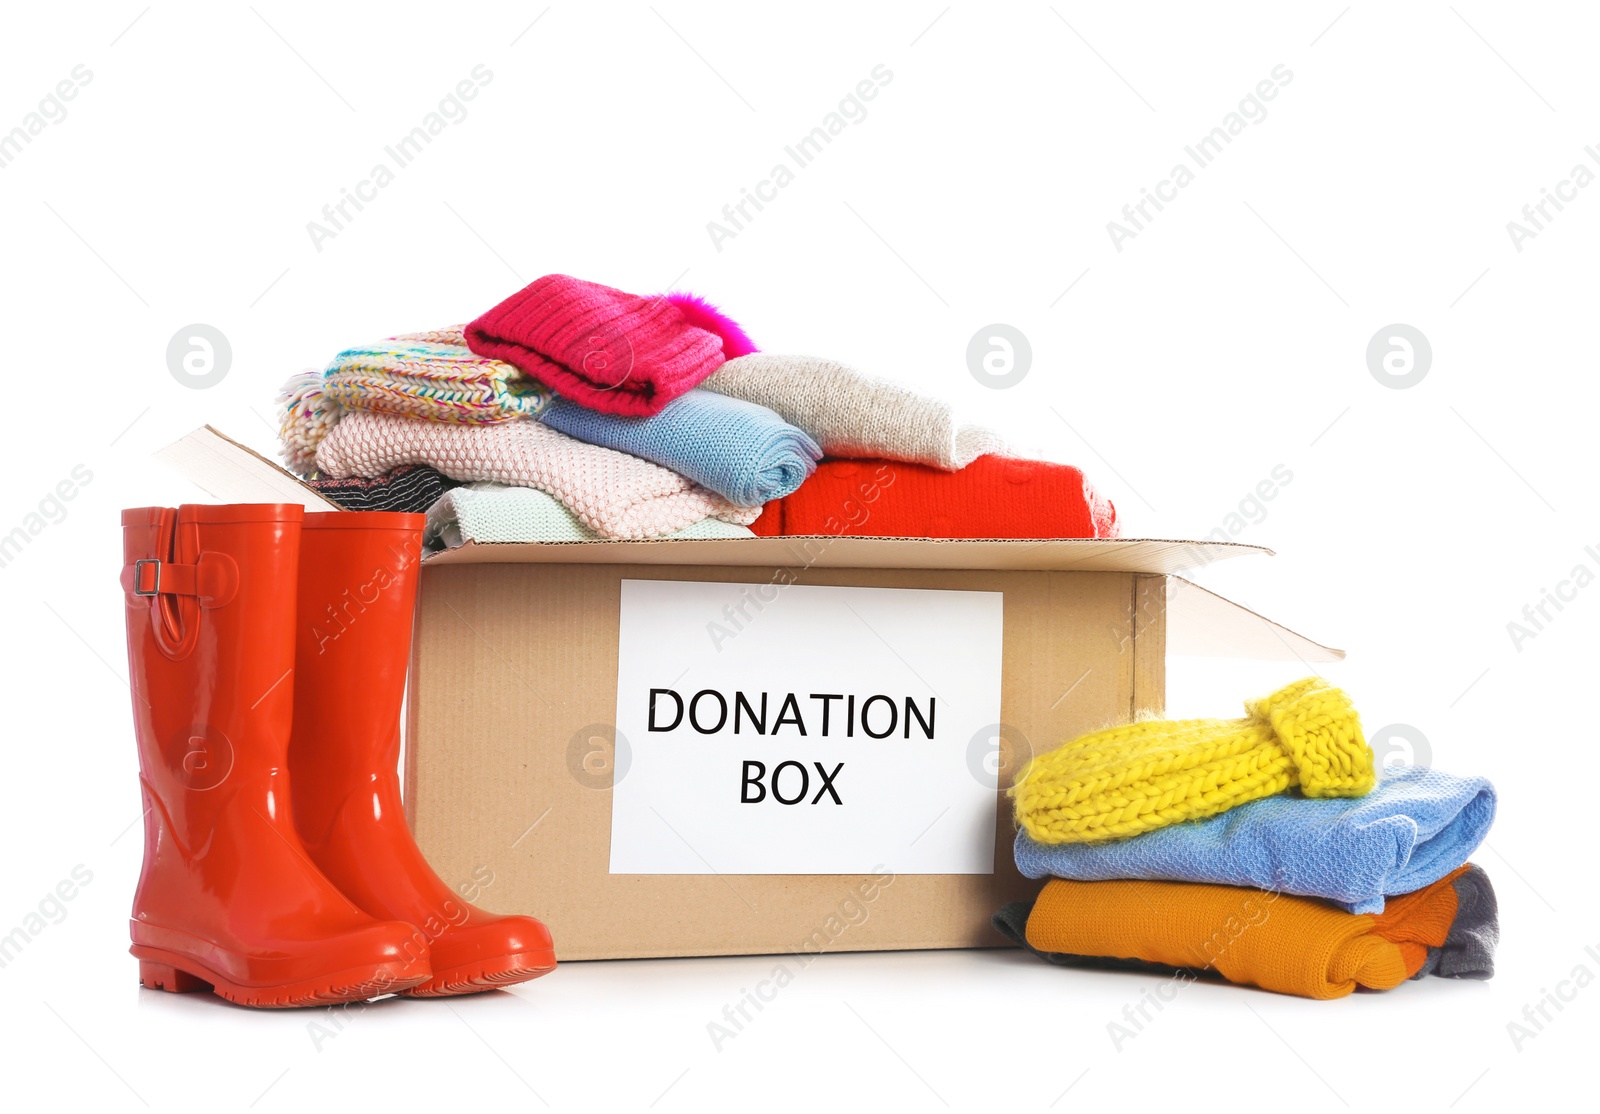 Photo of Donation box, rubber boots and clothes on white background